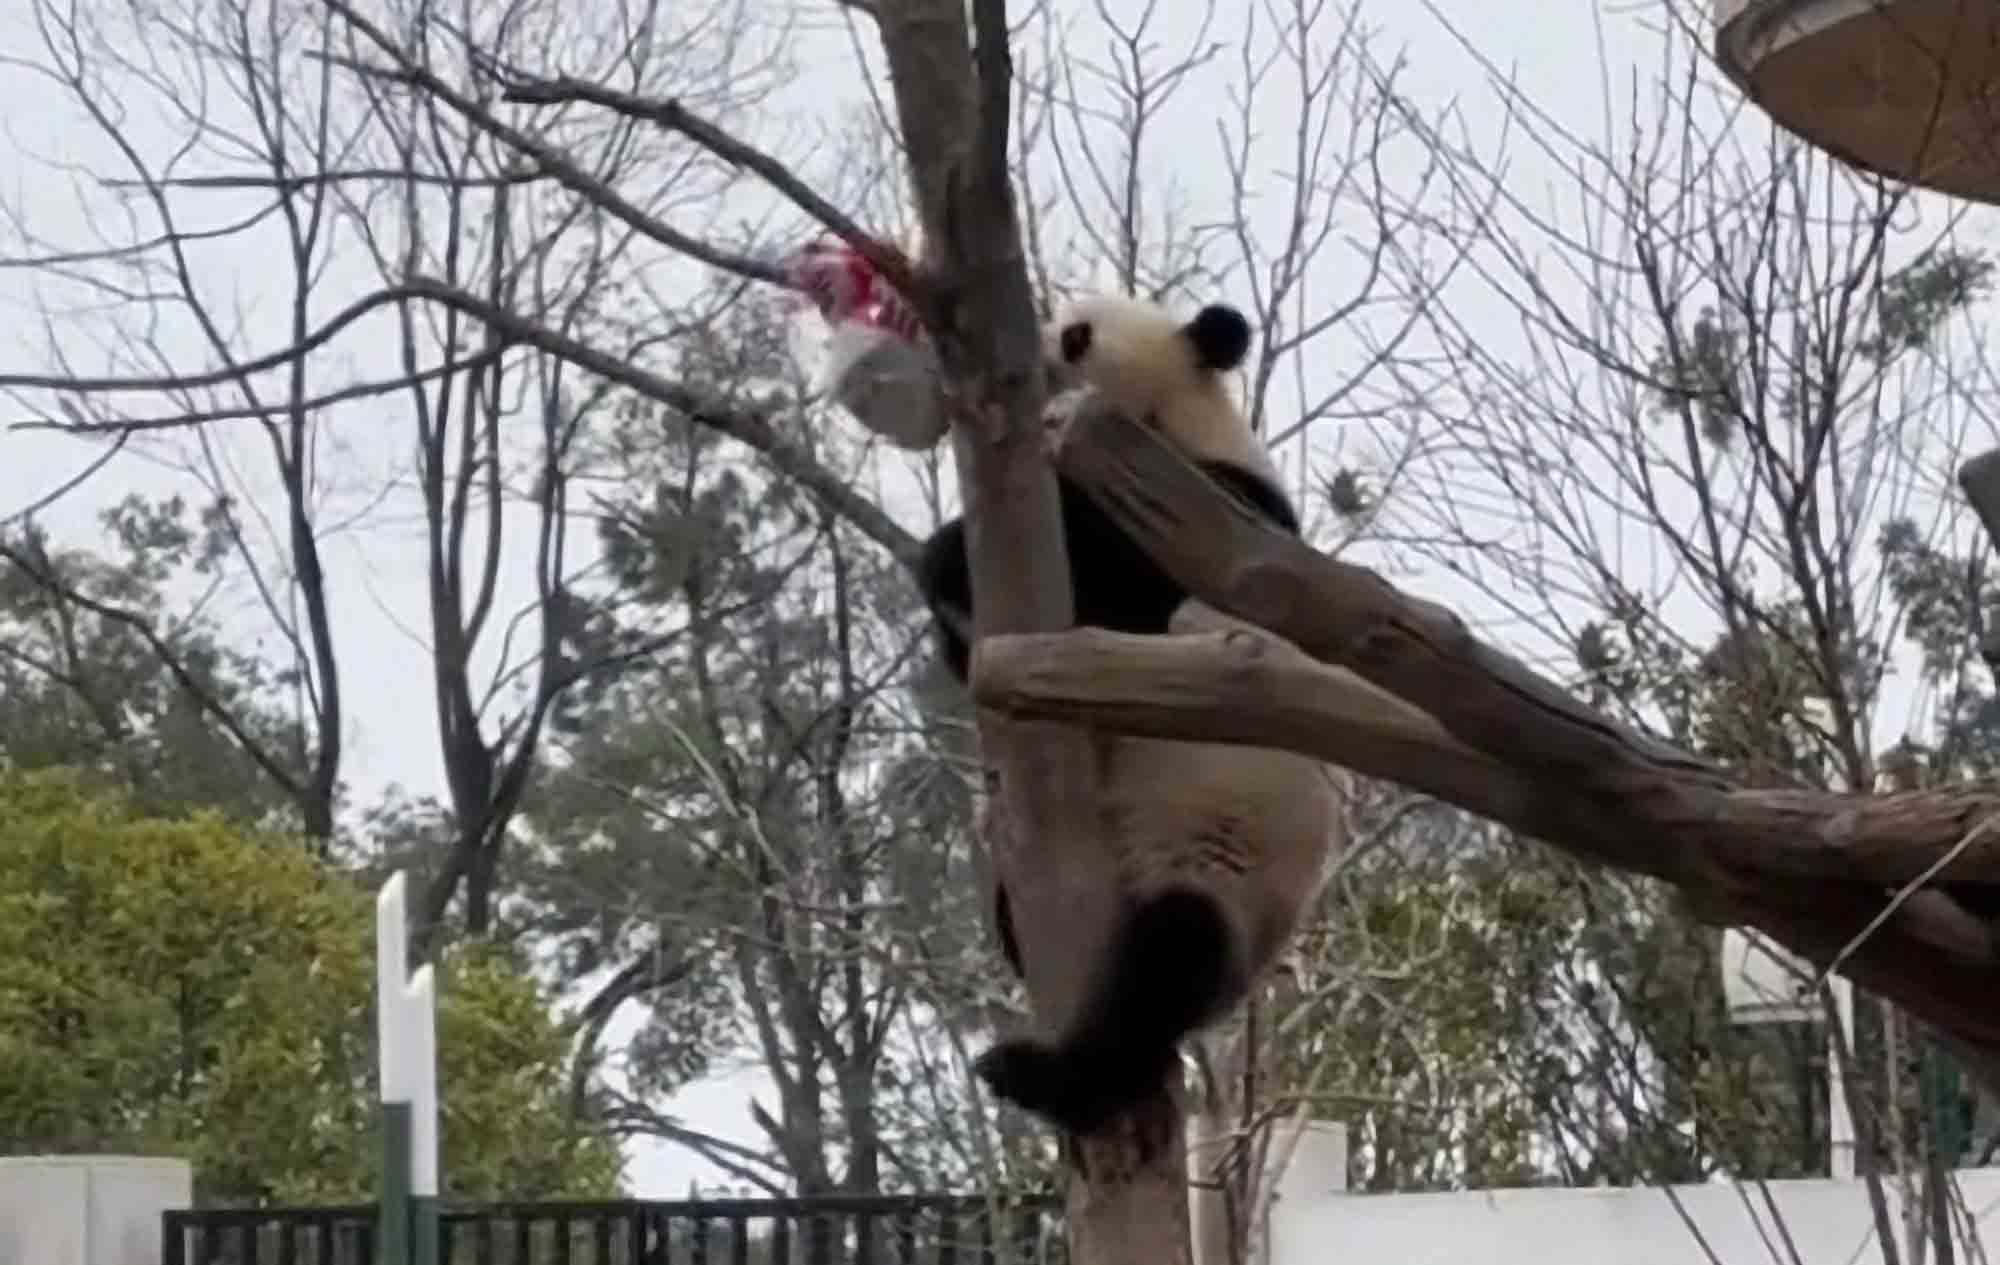 Curious Giant Panda Climbs Tree To Retrieve Flammable Hydrogen Balloon Stuck In Branches And Eats It